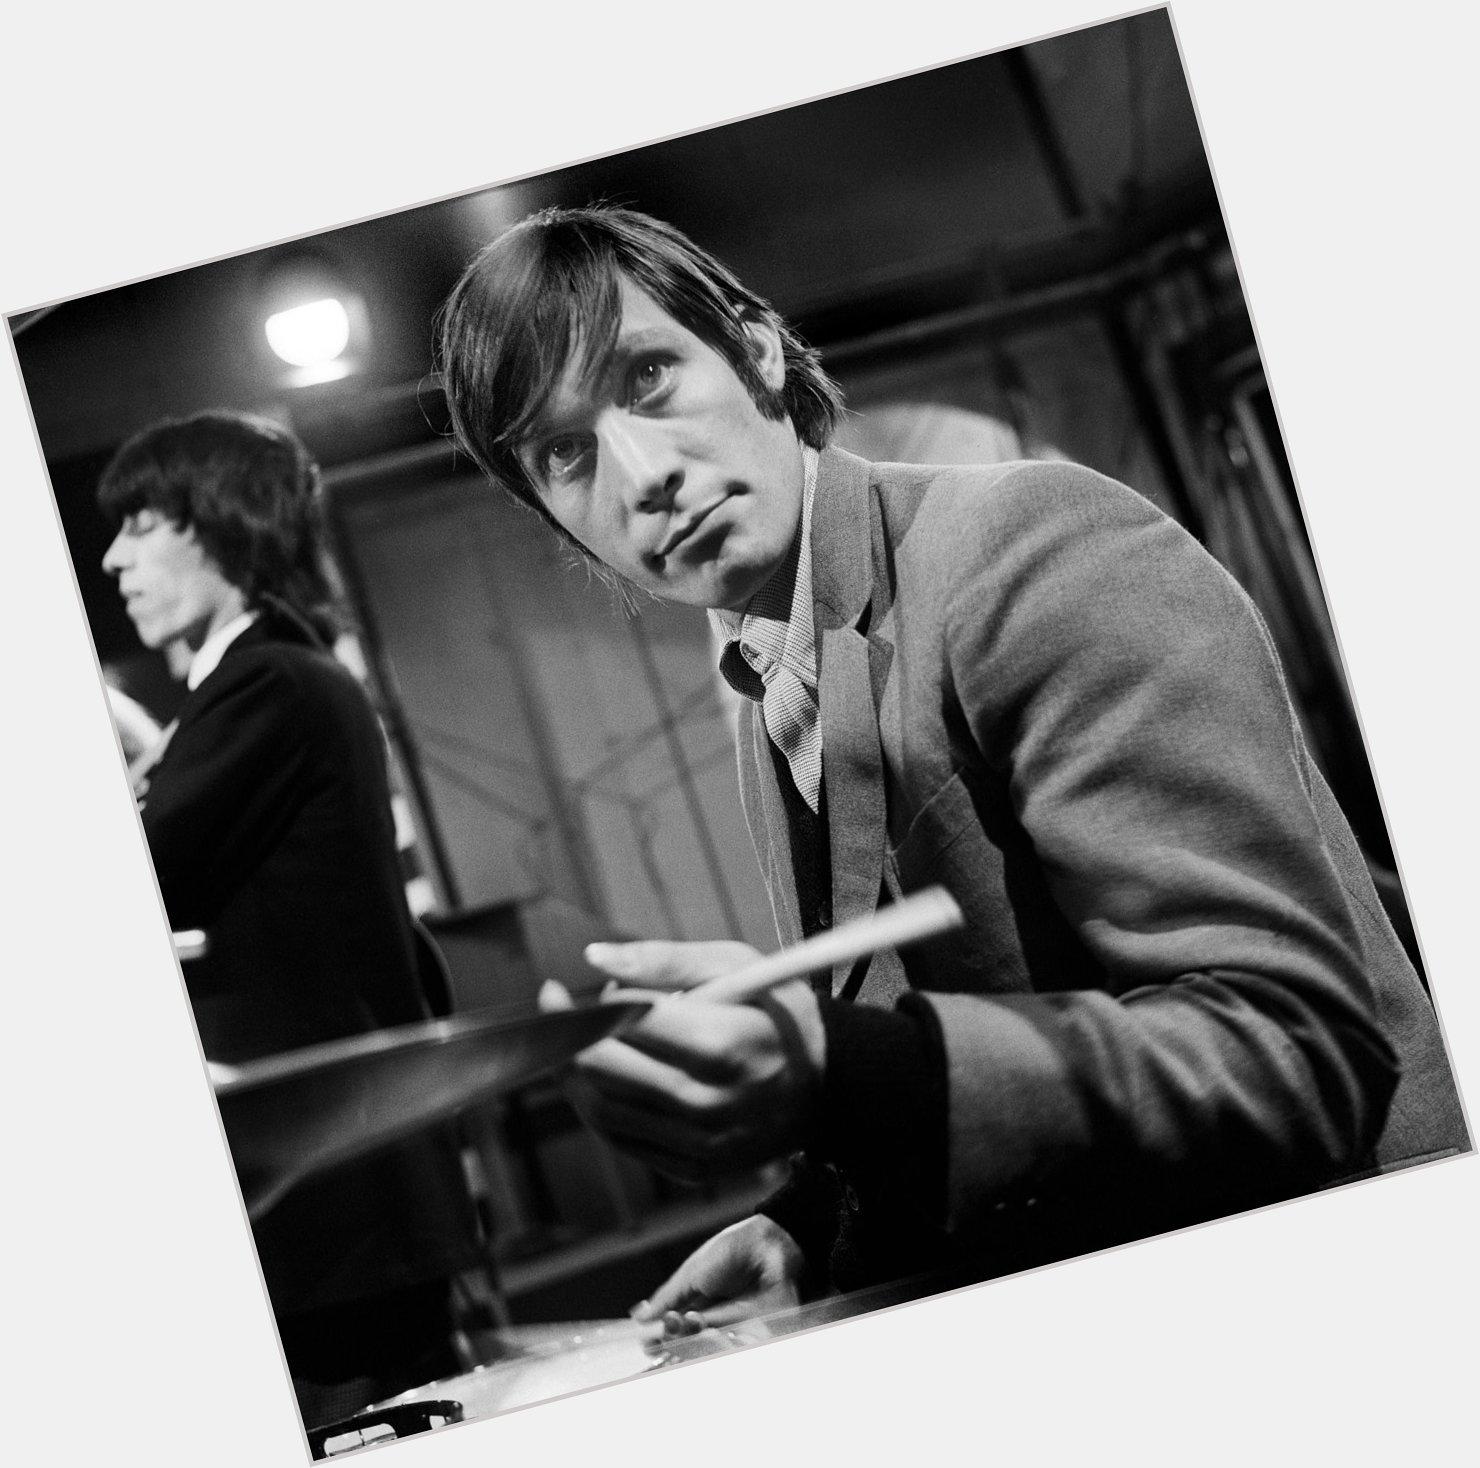 Happy birthday to English drummer Charlie Watts, born June 2, 1941, a member of The Rolling Stones since 1963. 